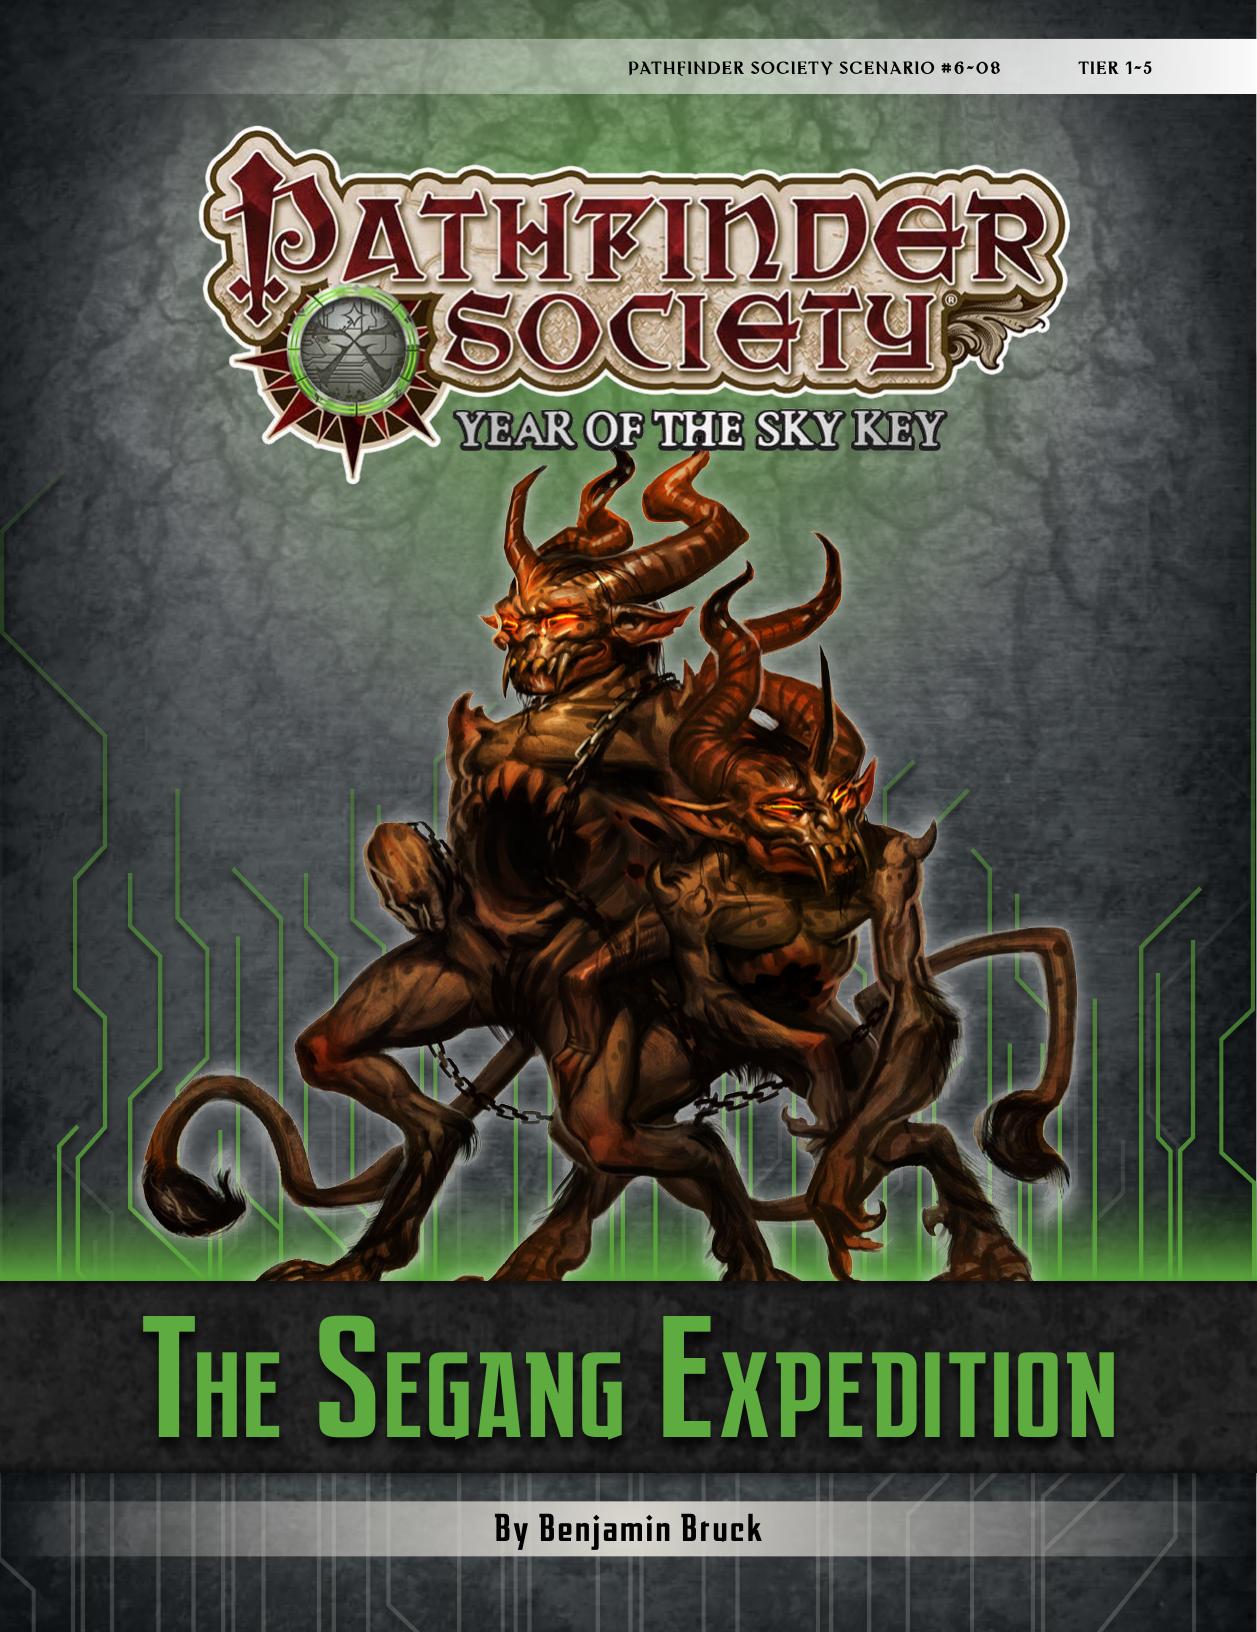 The Segang Expedition